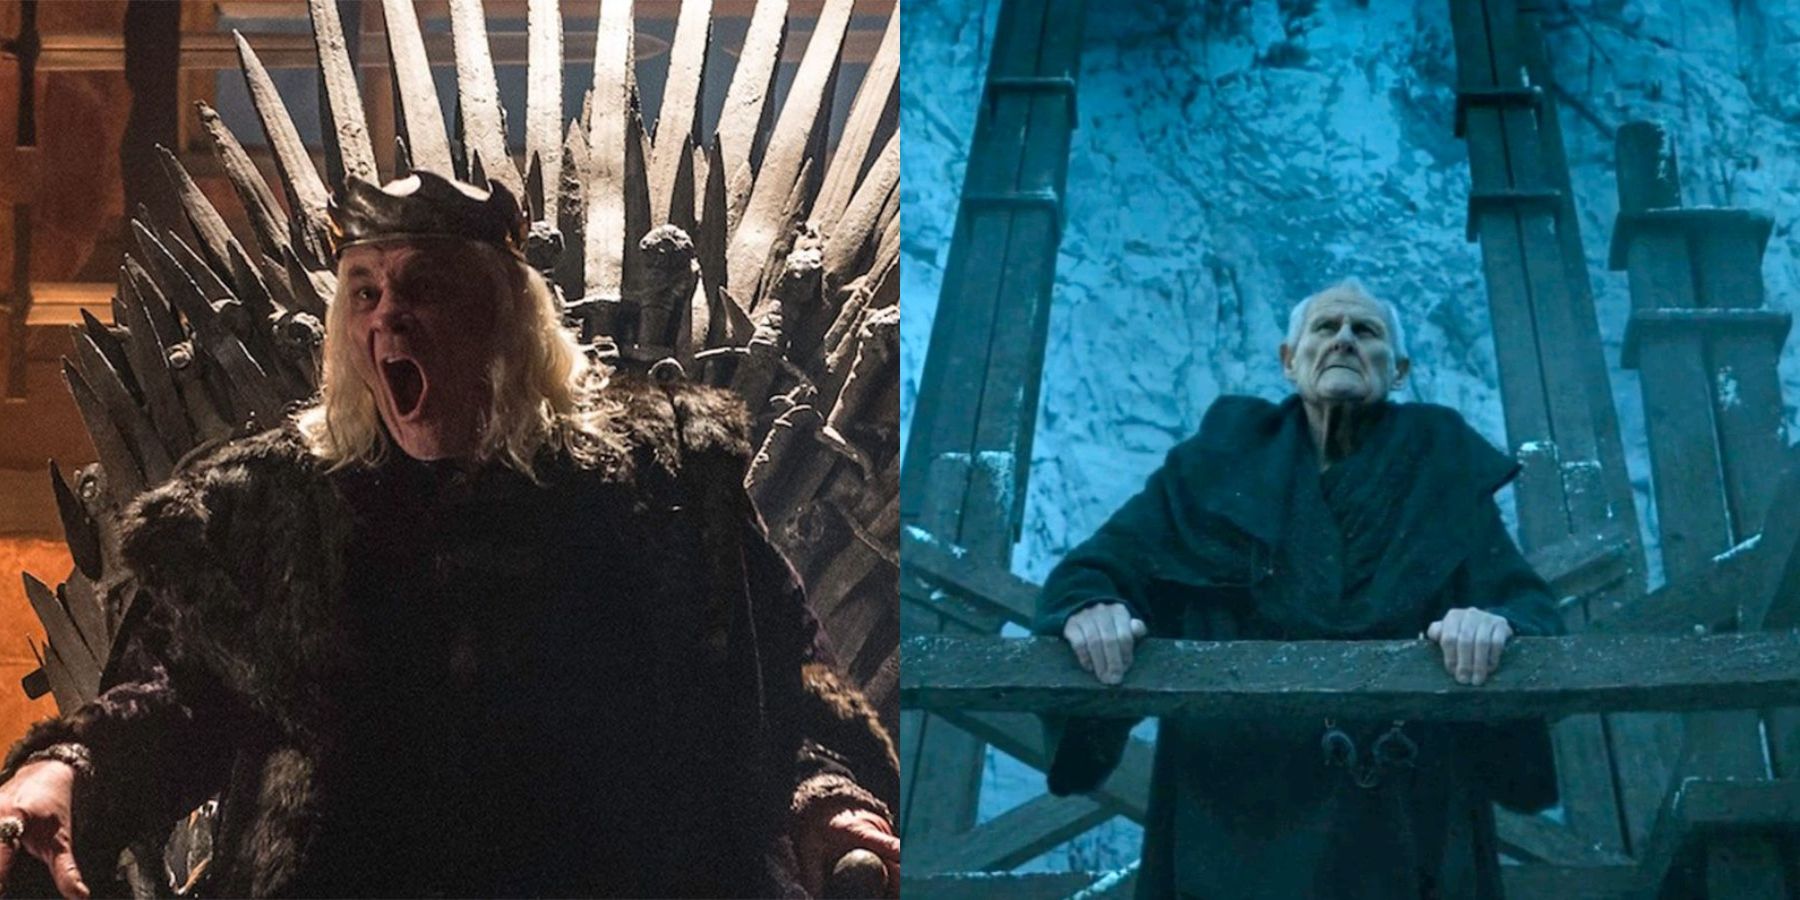 Split image of the Mad King and Maester Aemon Targaryen of the Night's Watch in Game of Thrones.